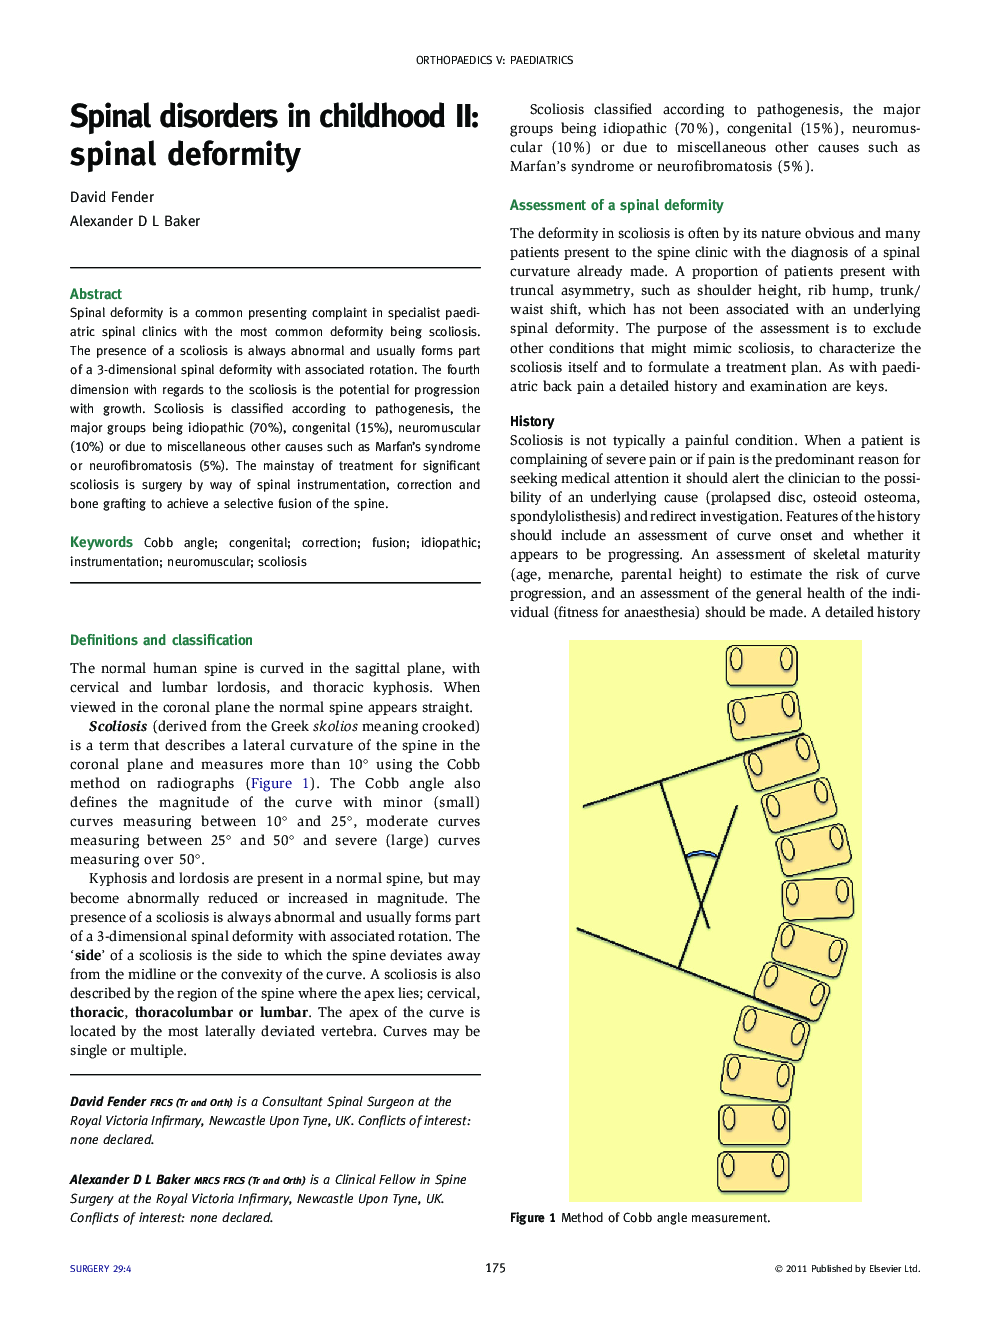 Spinal disorders in childhood II: spinal deformity